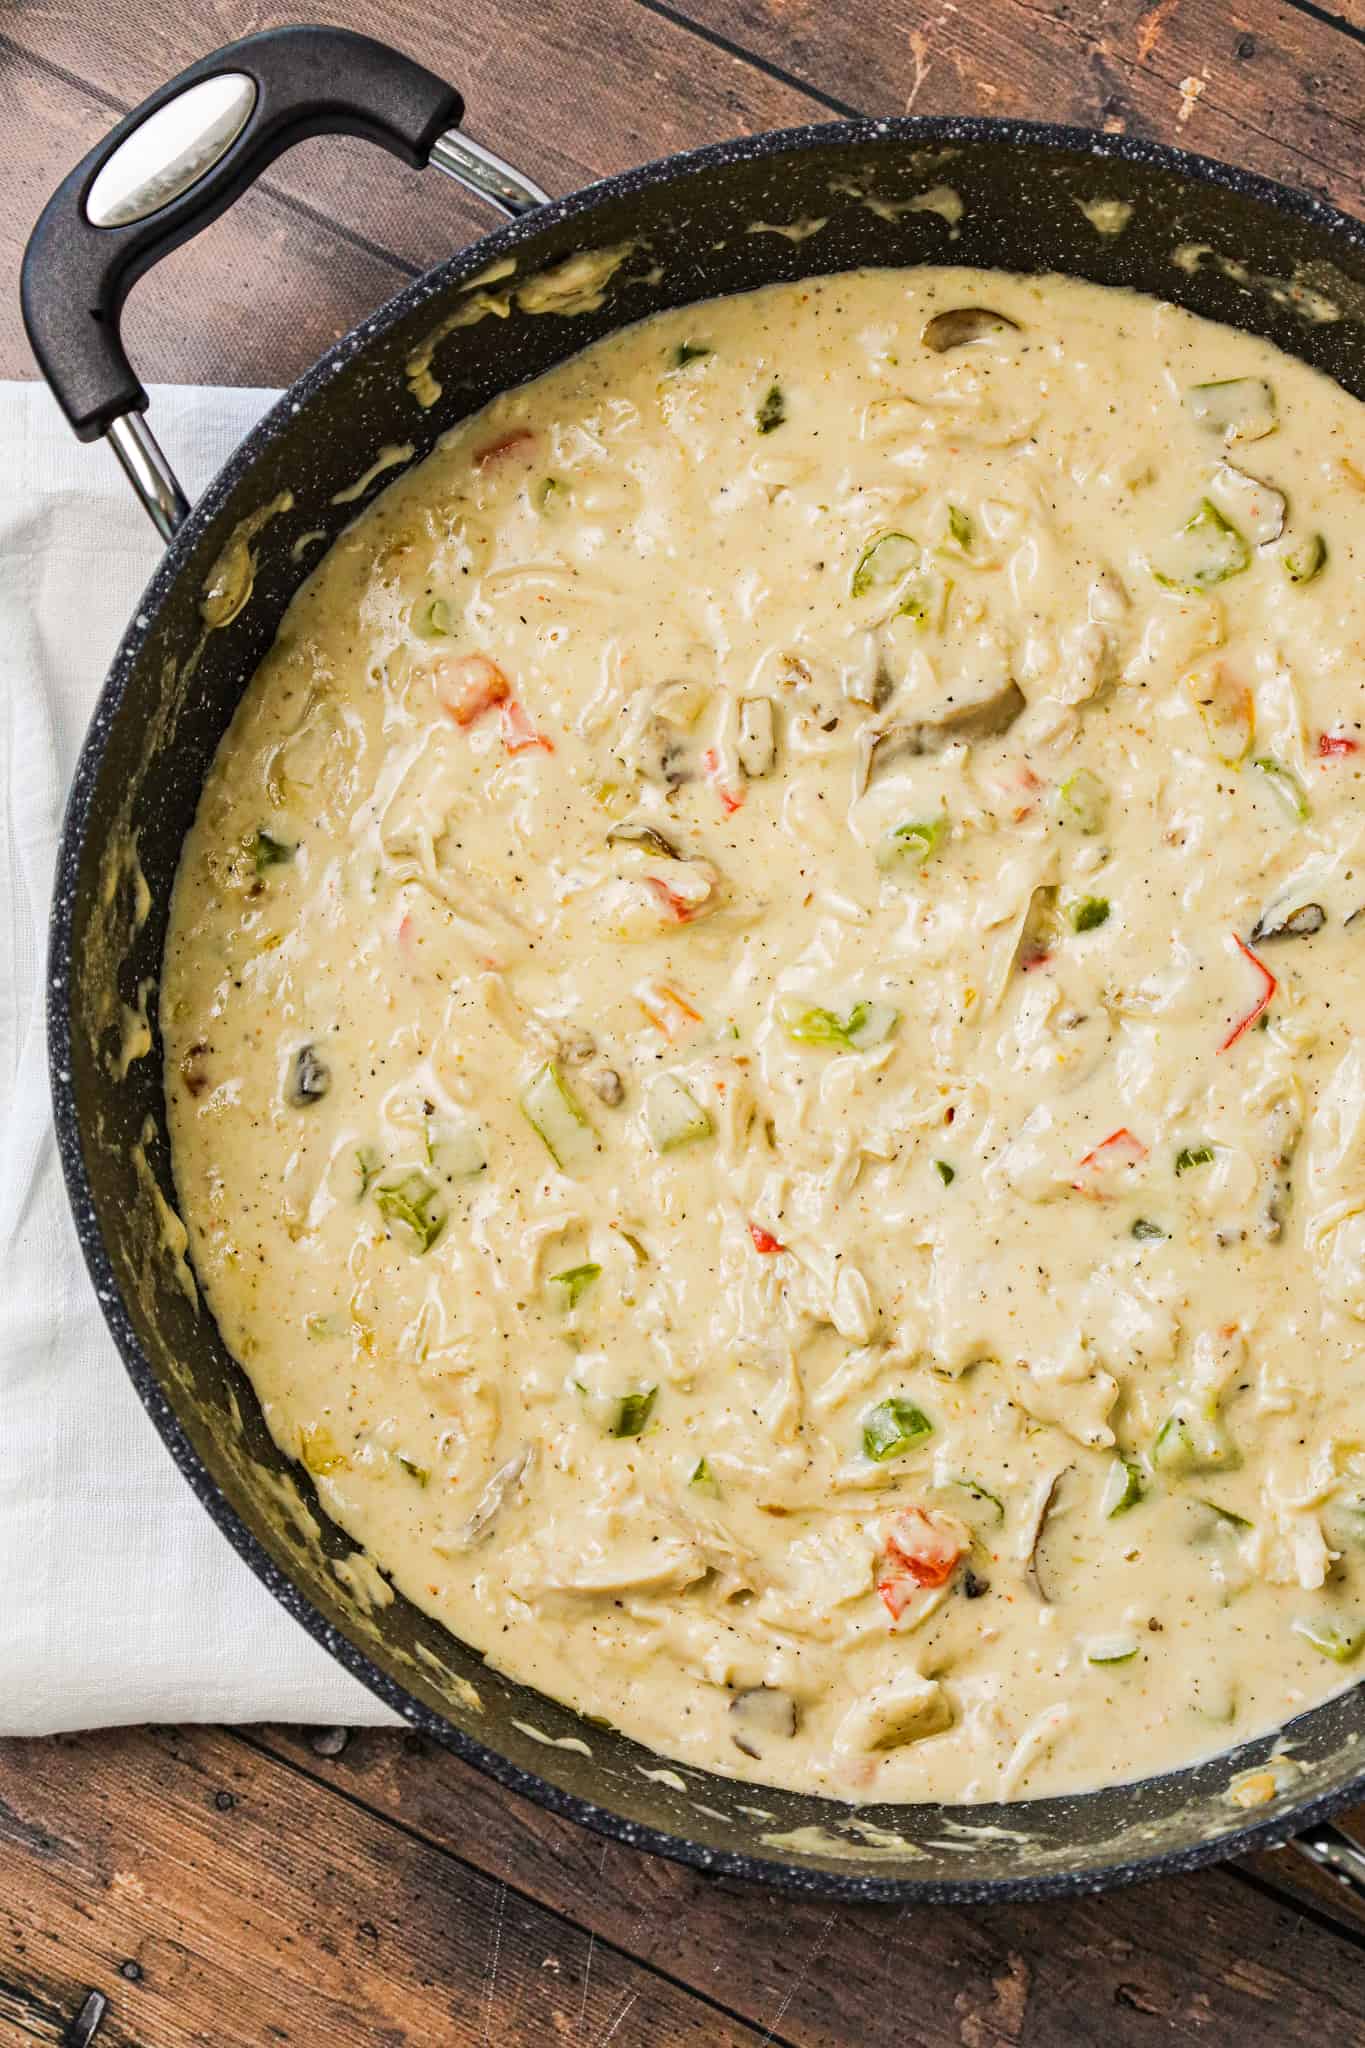 Turkey a la King is a hearty dinner recipe using leftover turkey in a creamy sauce with diced celery, mushrooms, green peppers and red peppers.